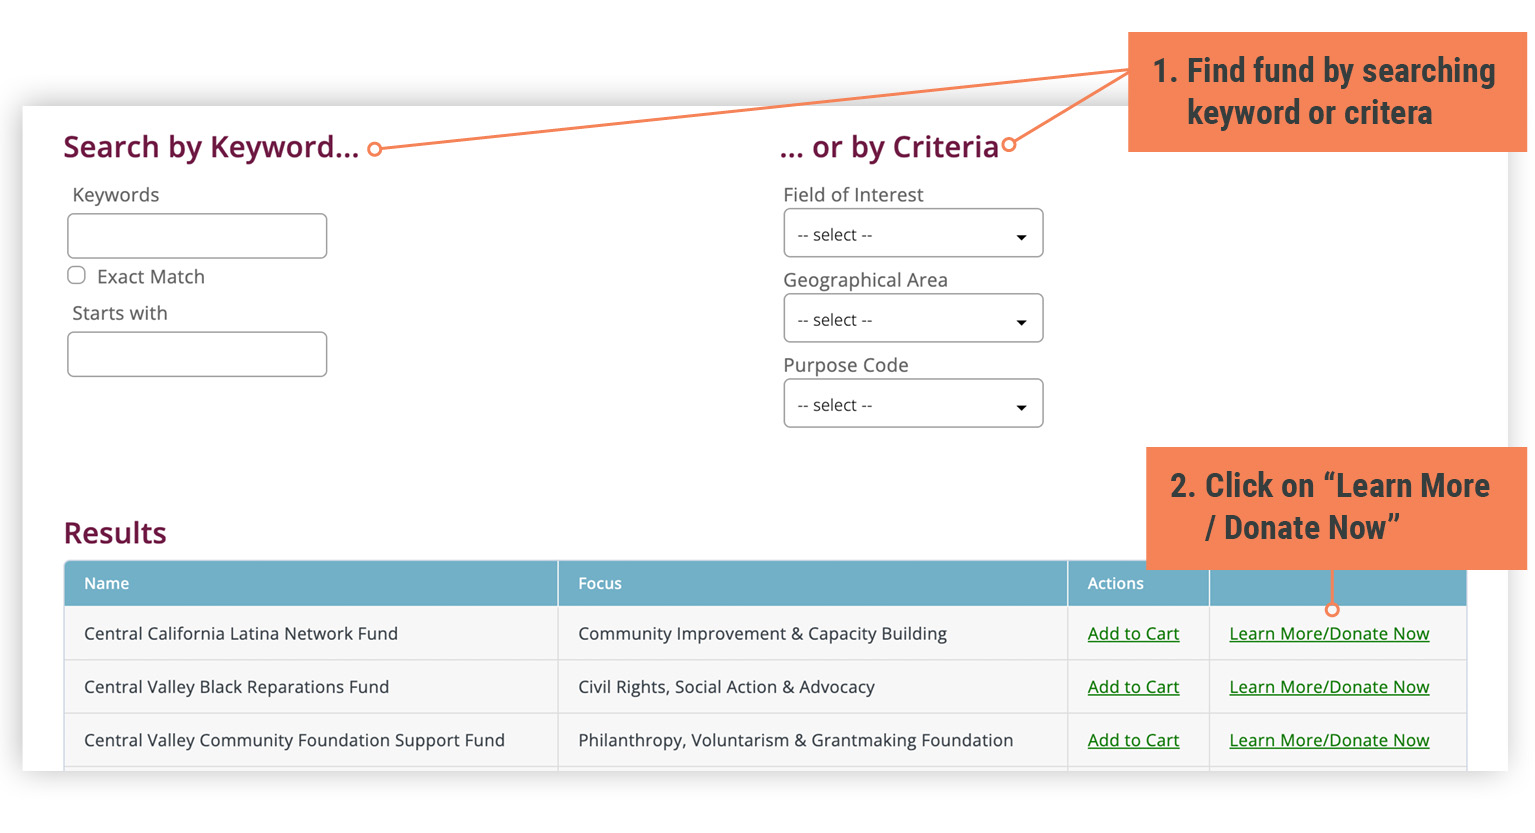 Instructions: 
1: Find fund by searching keyword or criteria 2: Click on "Learn More/Donate Now"